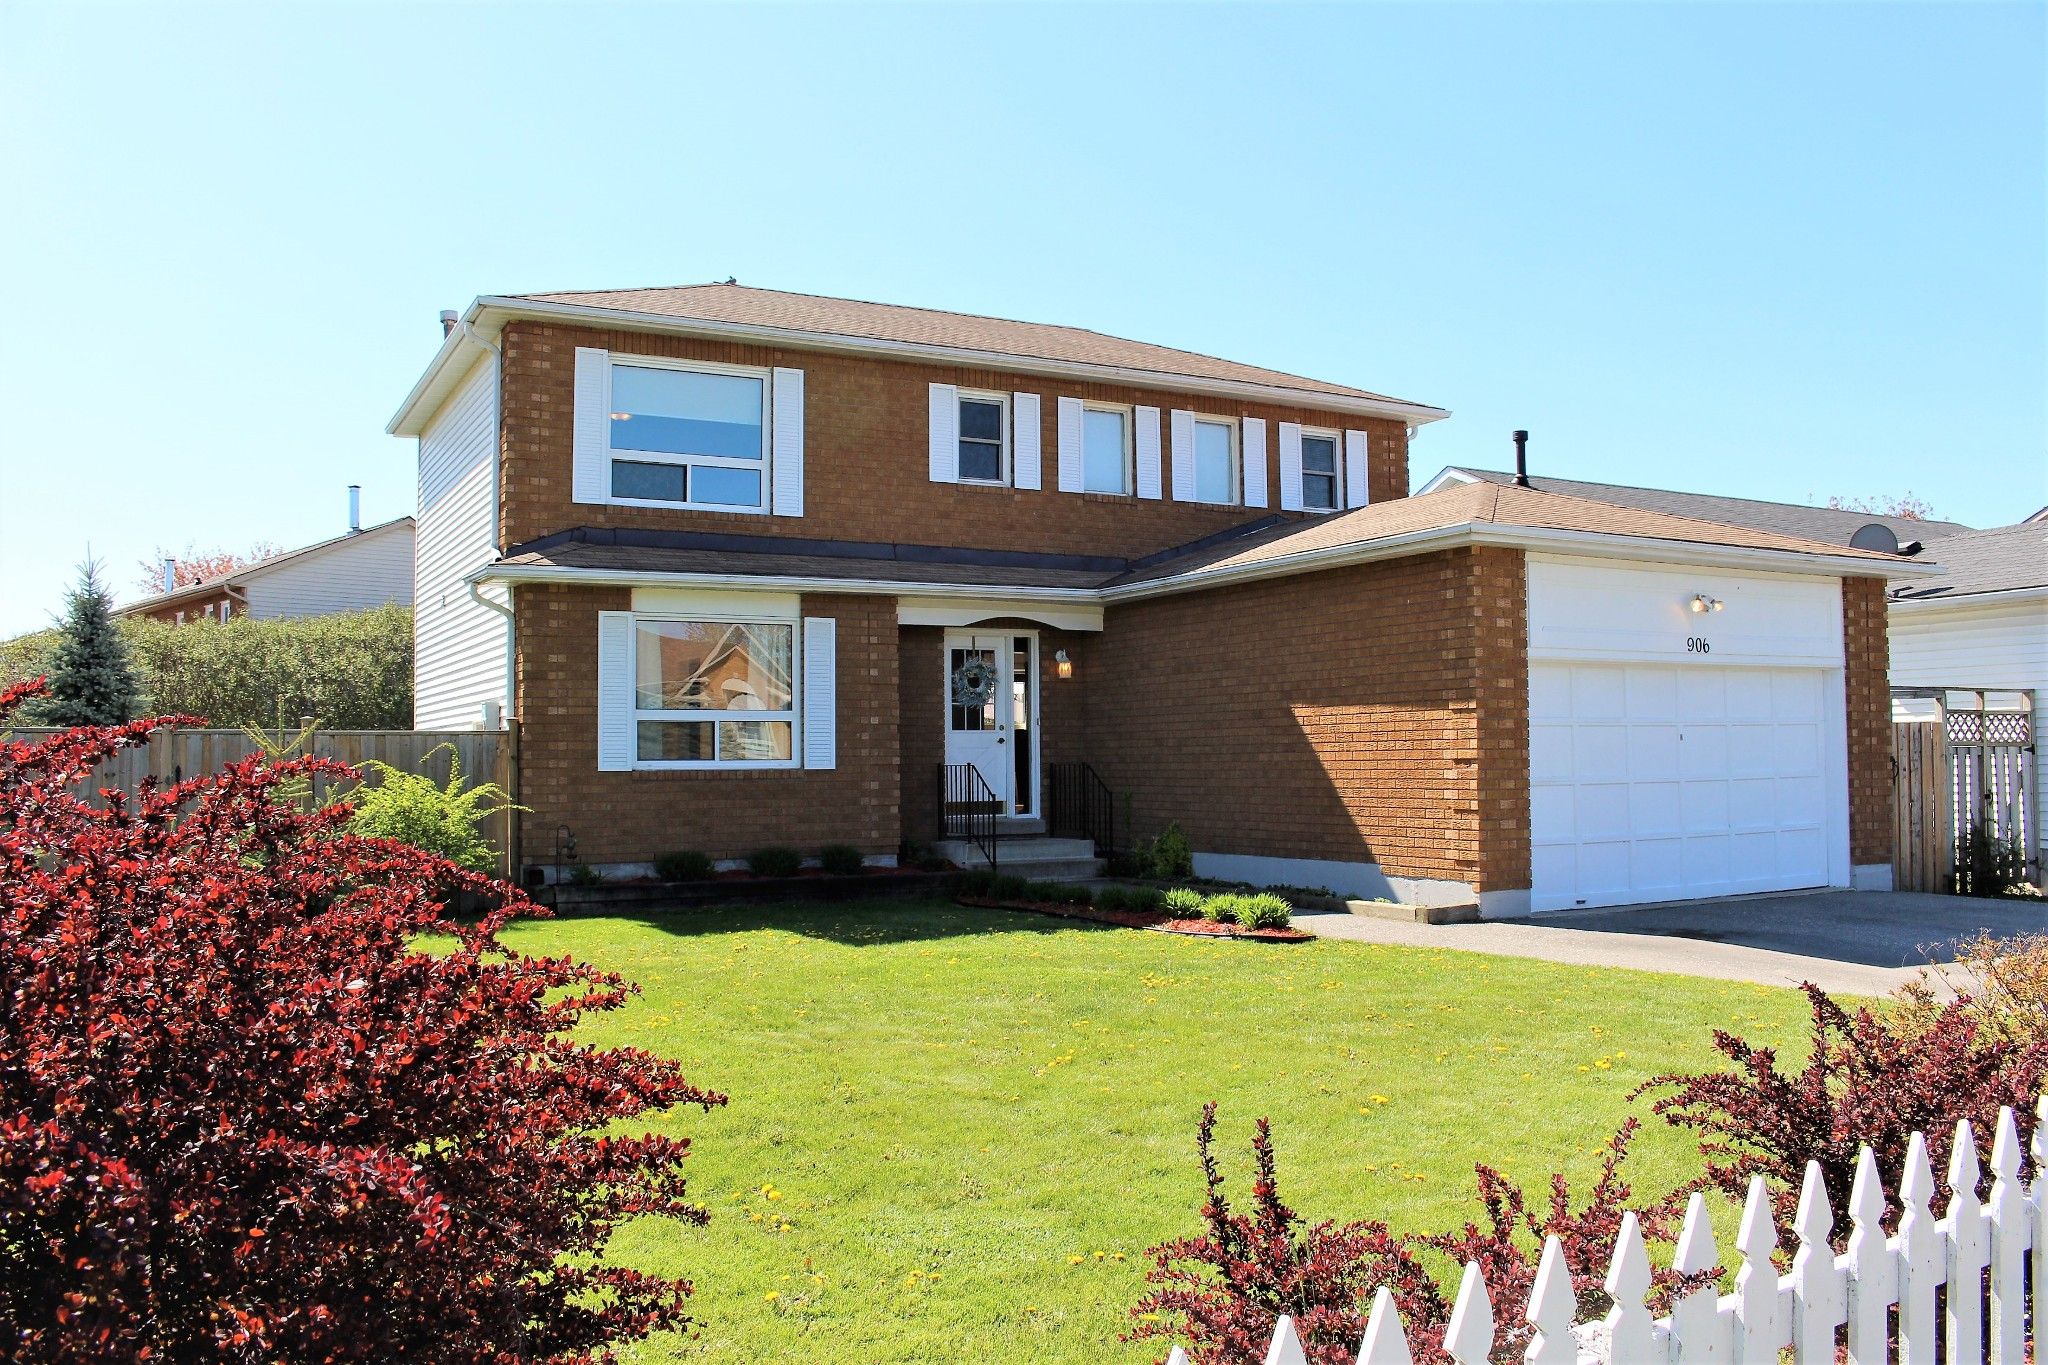 Main Photo: 906 Chipping Park in Cobourg: House for sale : MLS®# X5250442